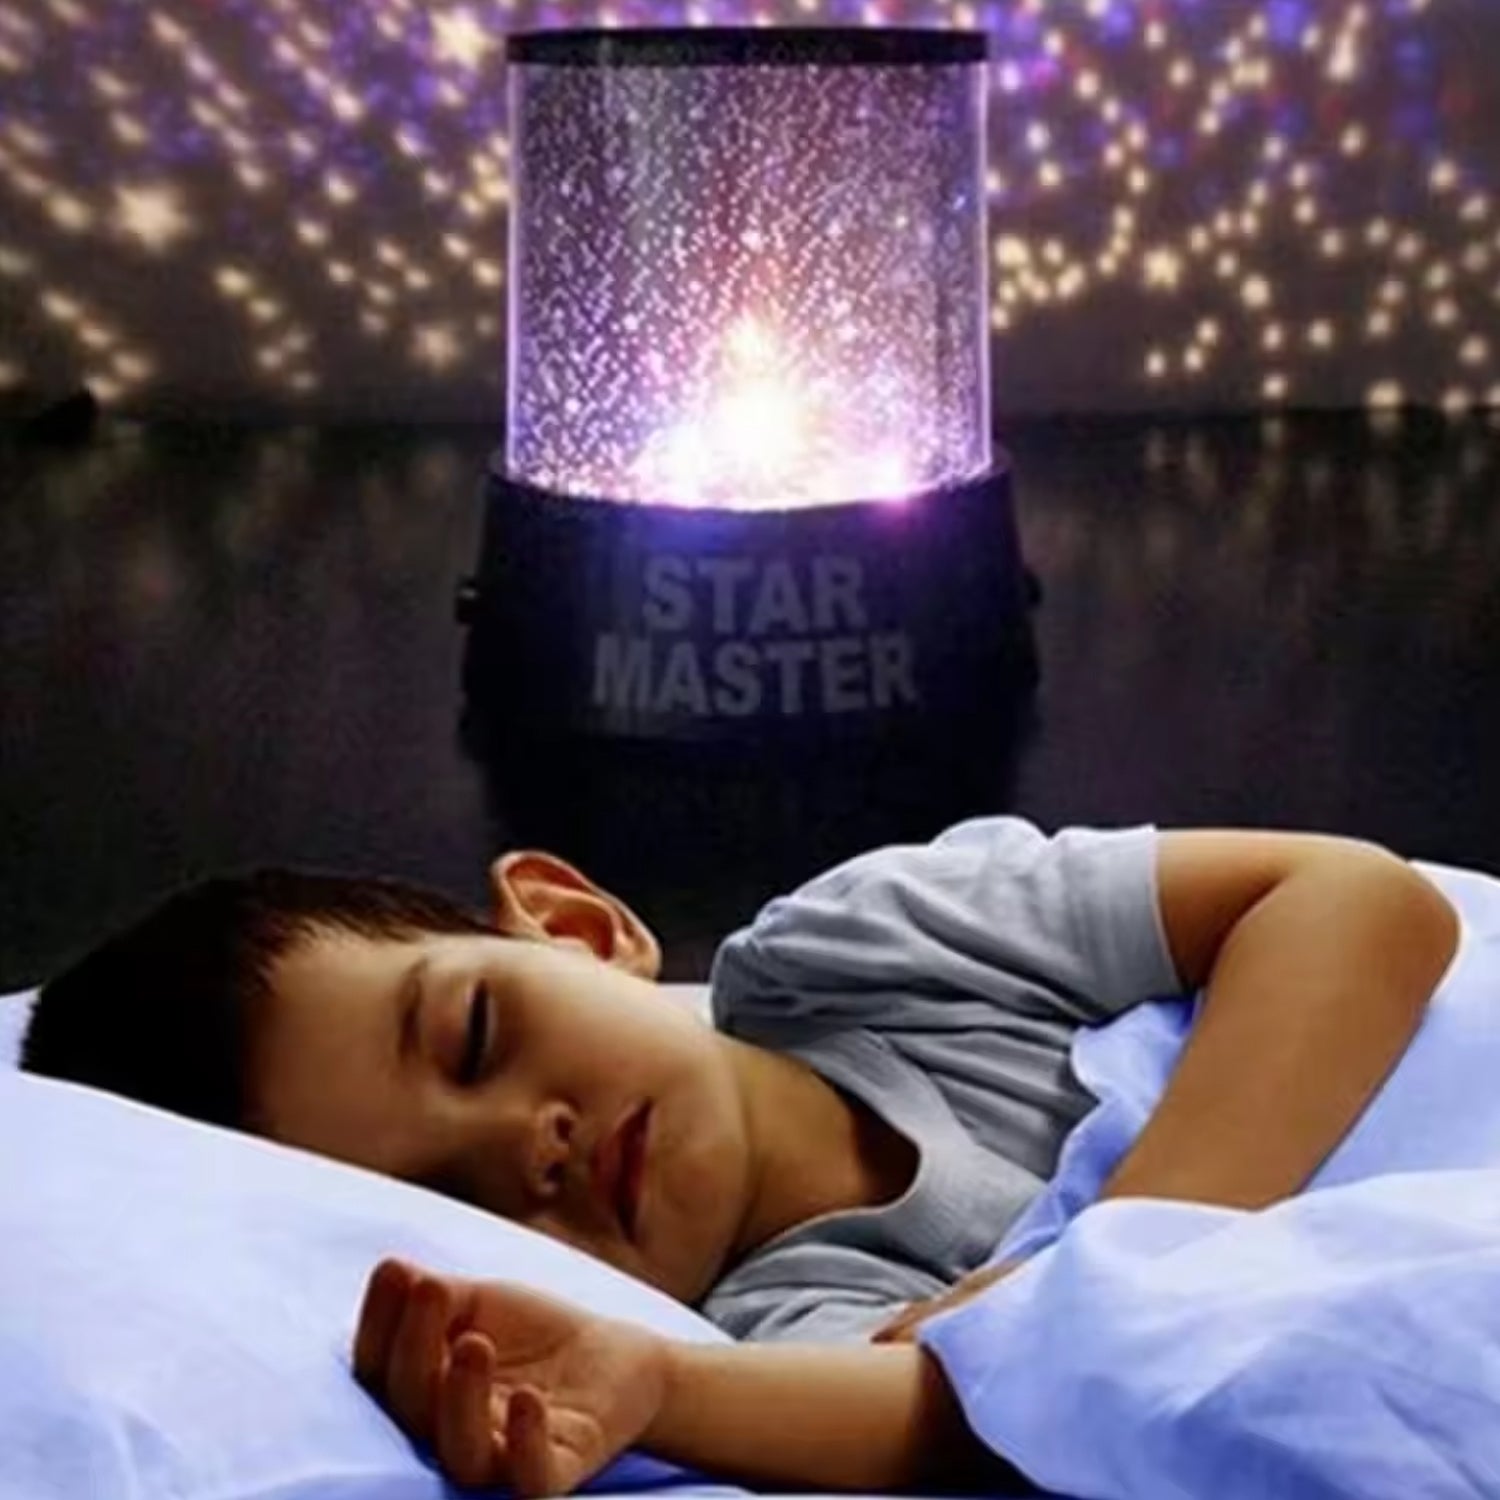 LED Projector Night Light Amazing Lamp, 3 Battery operated lamps, Rotation With the music Function, Master for Kids Bedroom Home Decoration Night Romantic Gift (Battery Not Included / 1 pc)